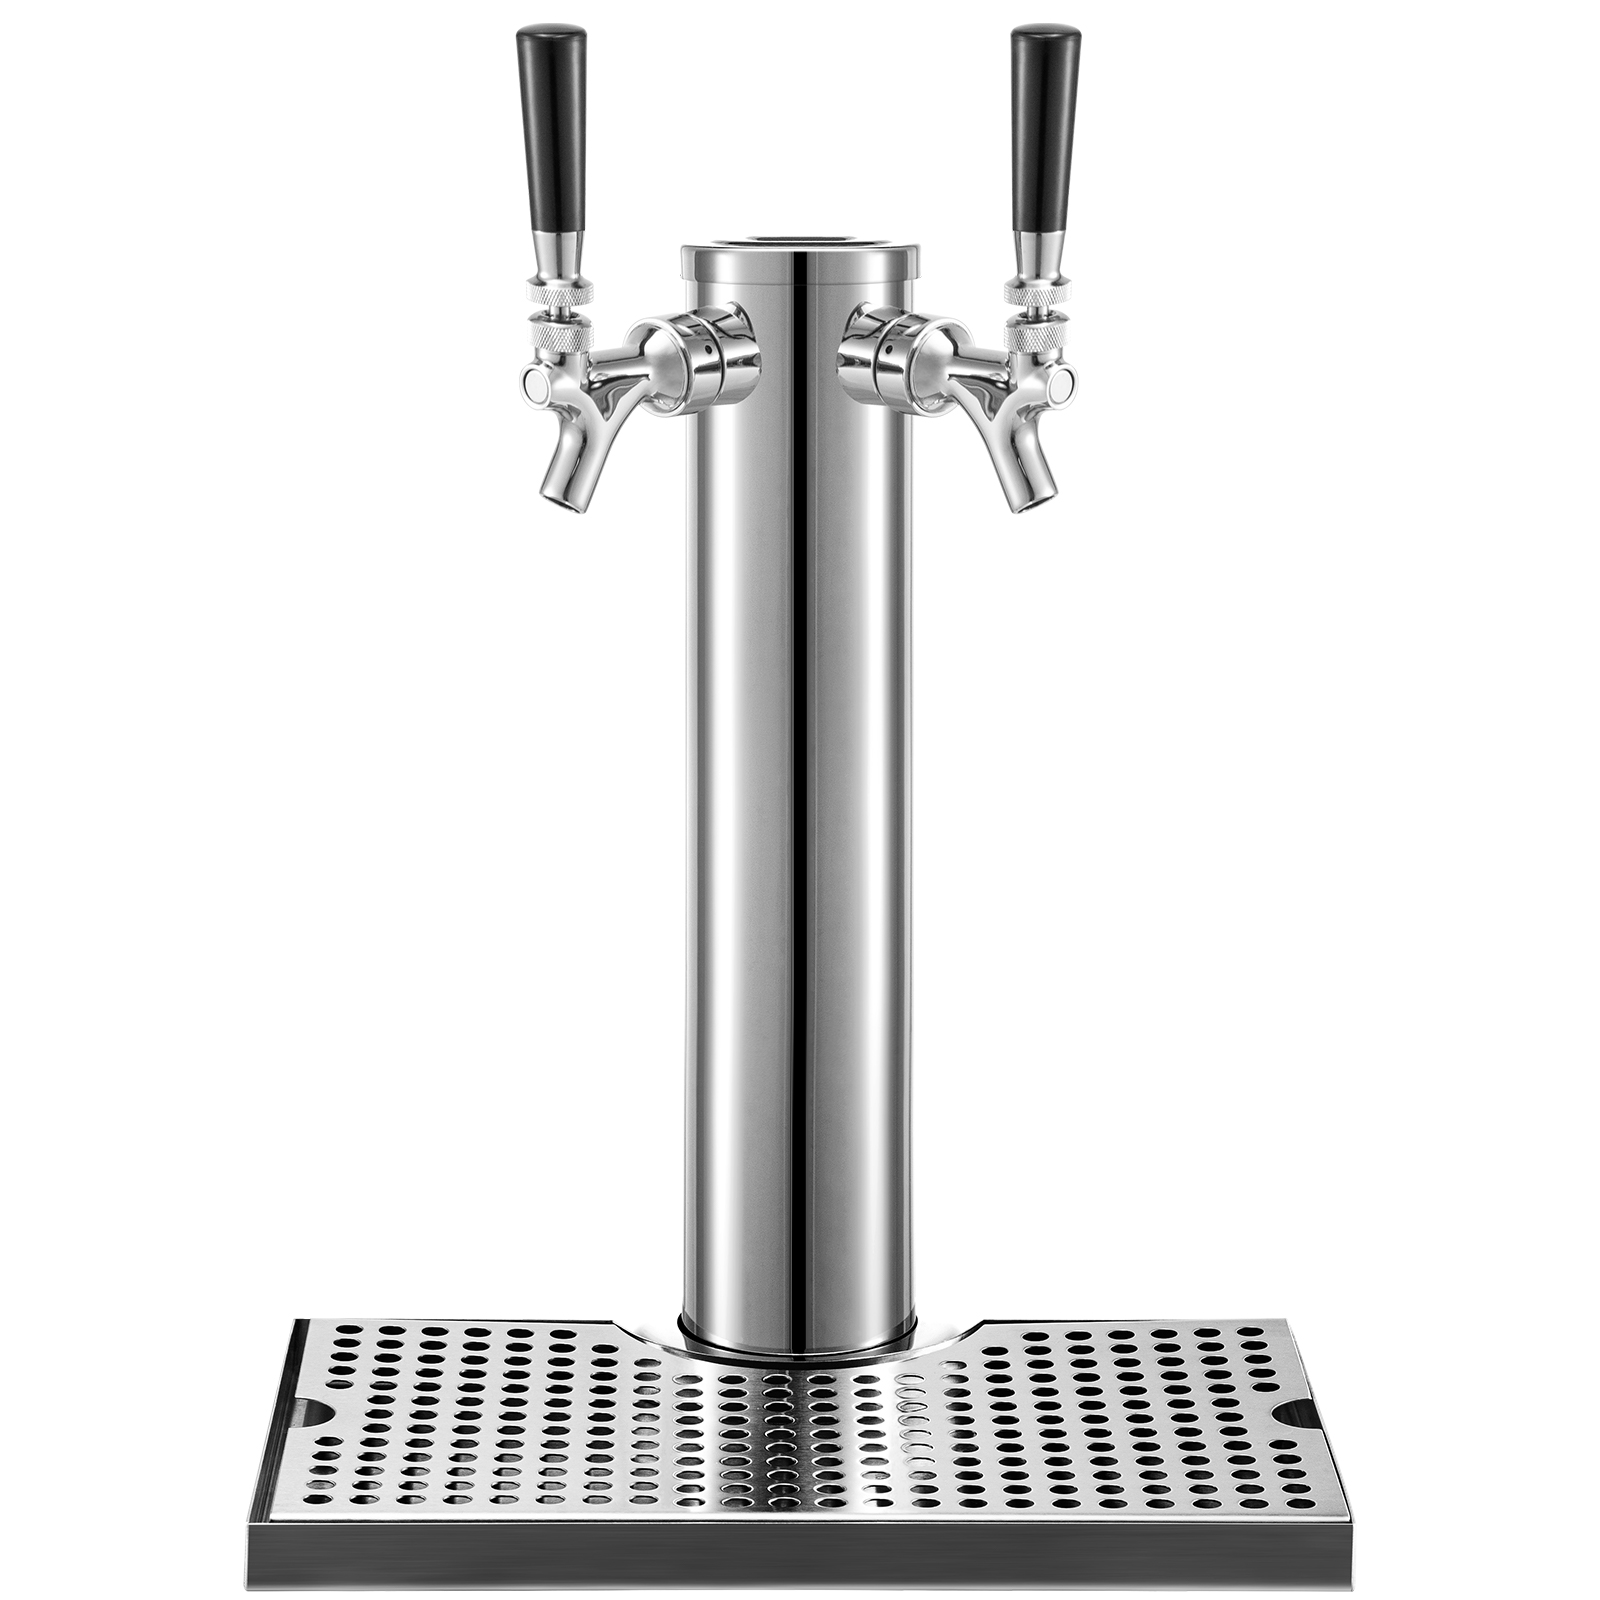 Vevor Beer Tower Kegerator Tower 2 Faucet Beer Tower Stainless Steel Drip Tray от Vevor Many GEOs